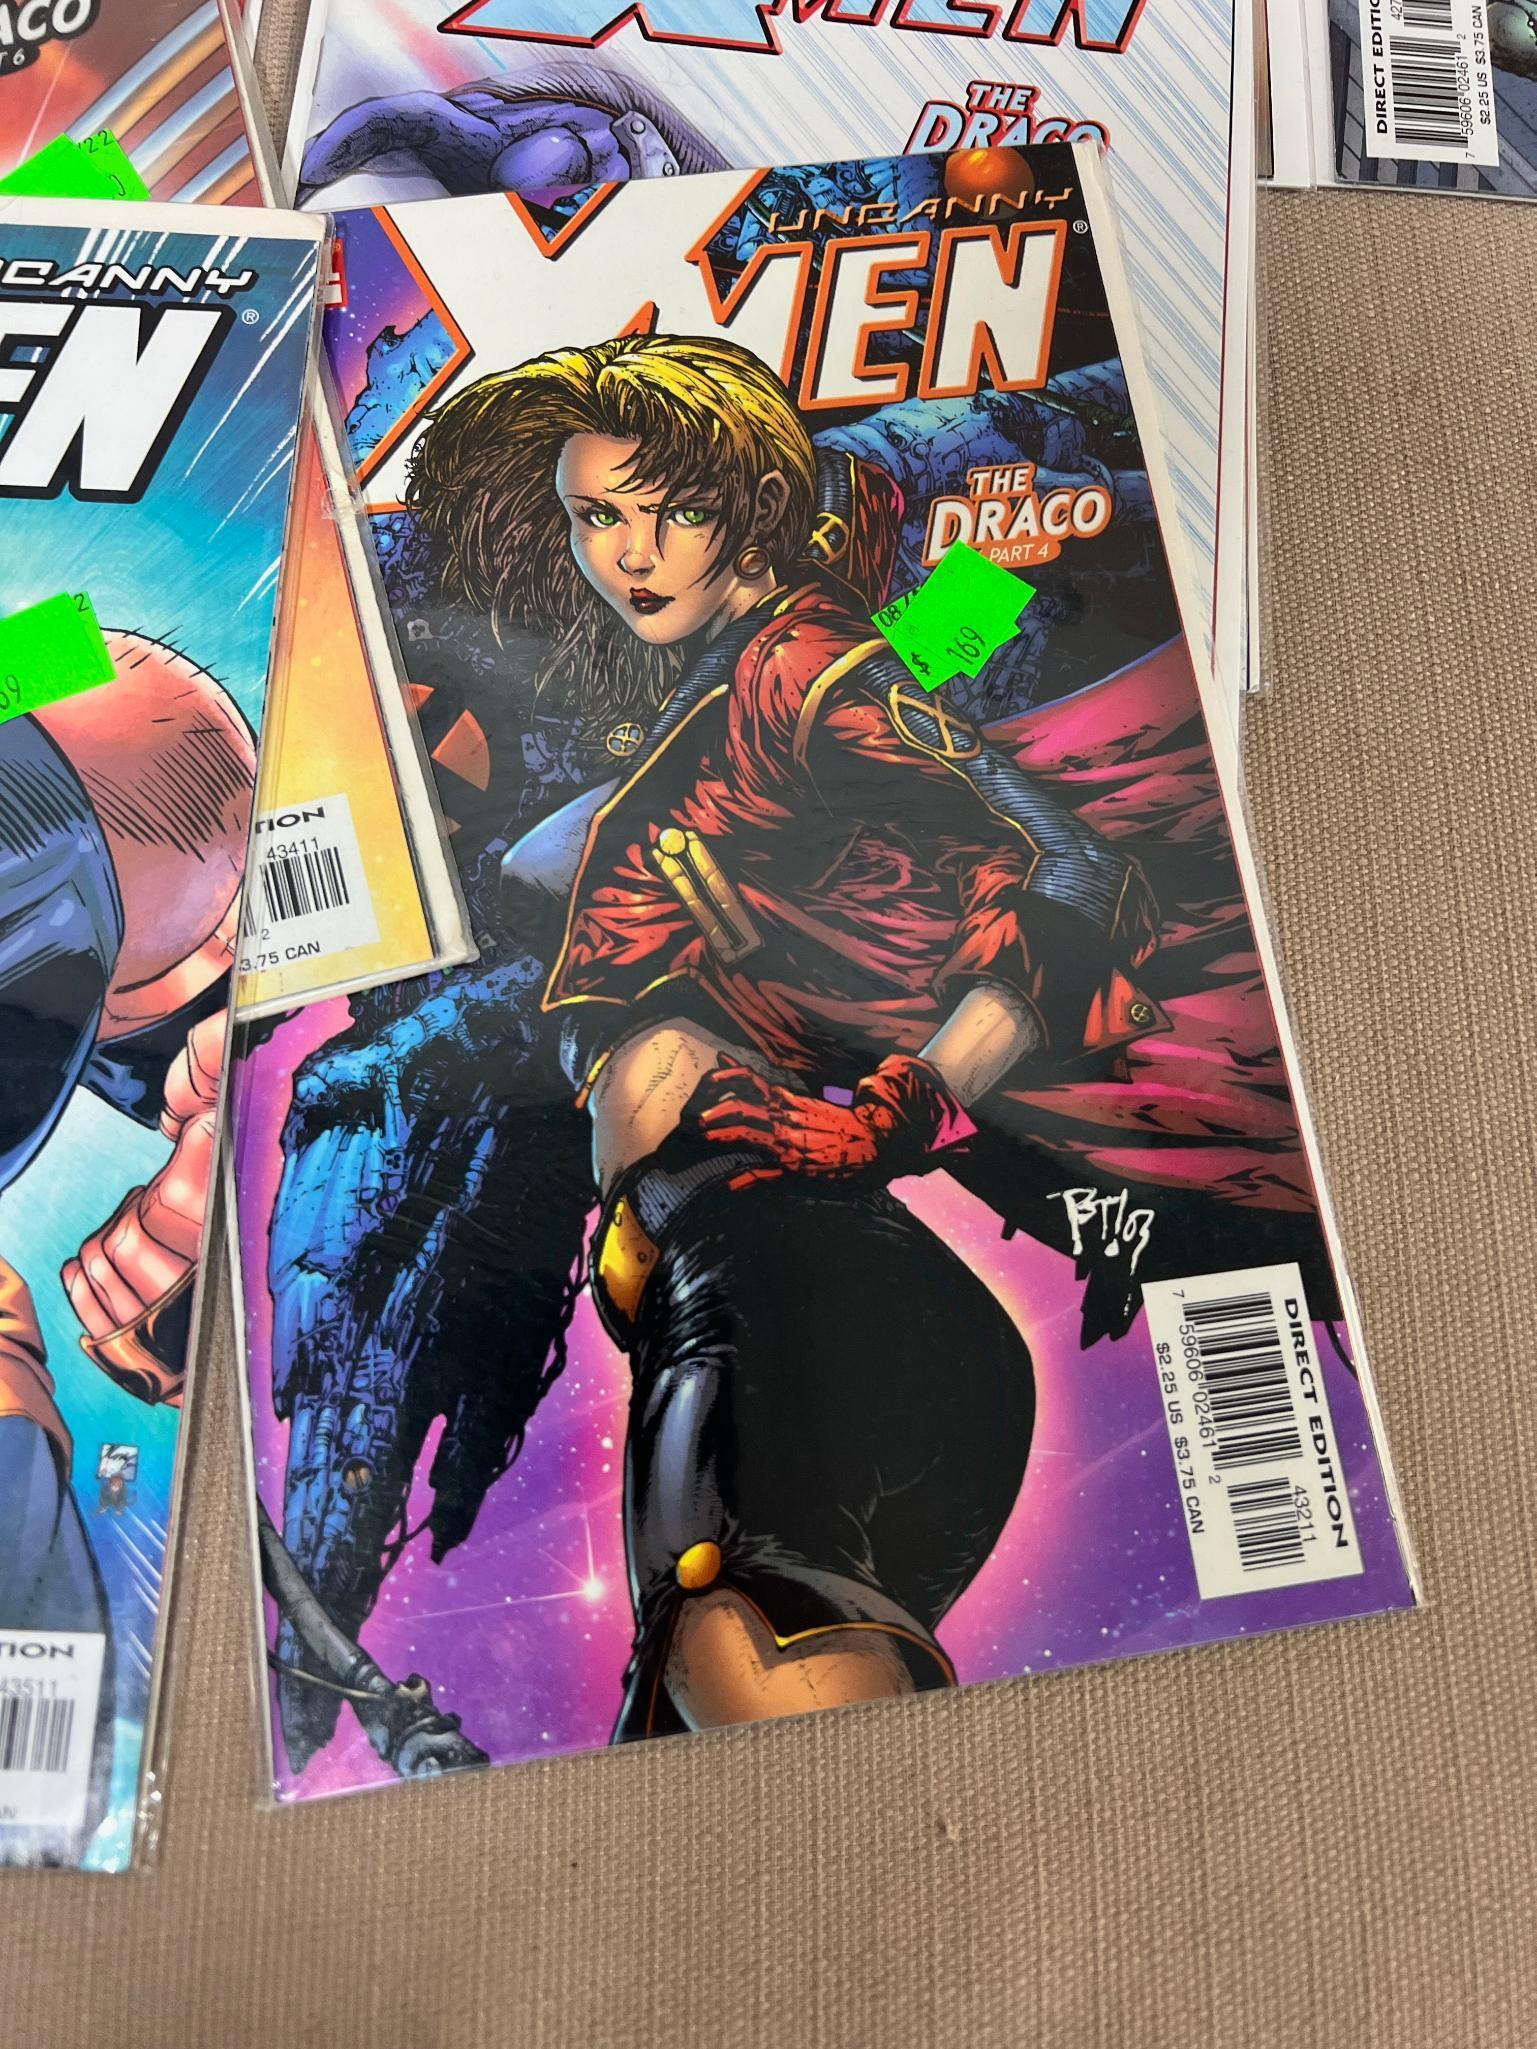 20+ Uncanny X-Men and related Comic Books issues 424- 436, some dups, some gaps, see pics